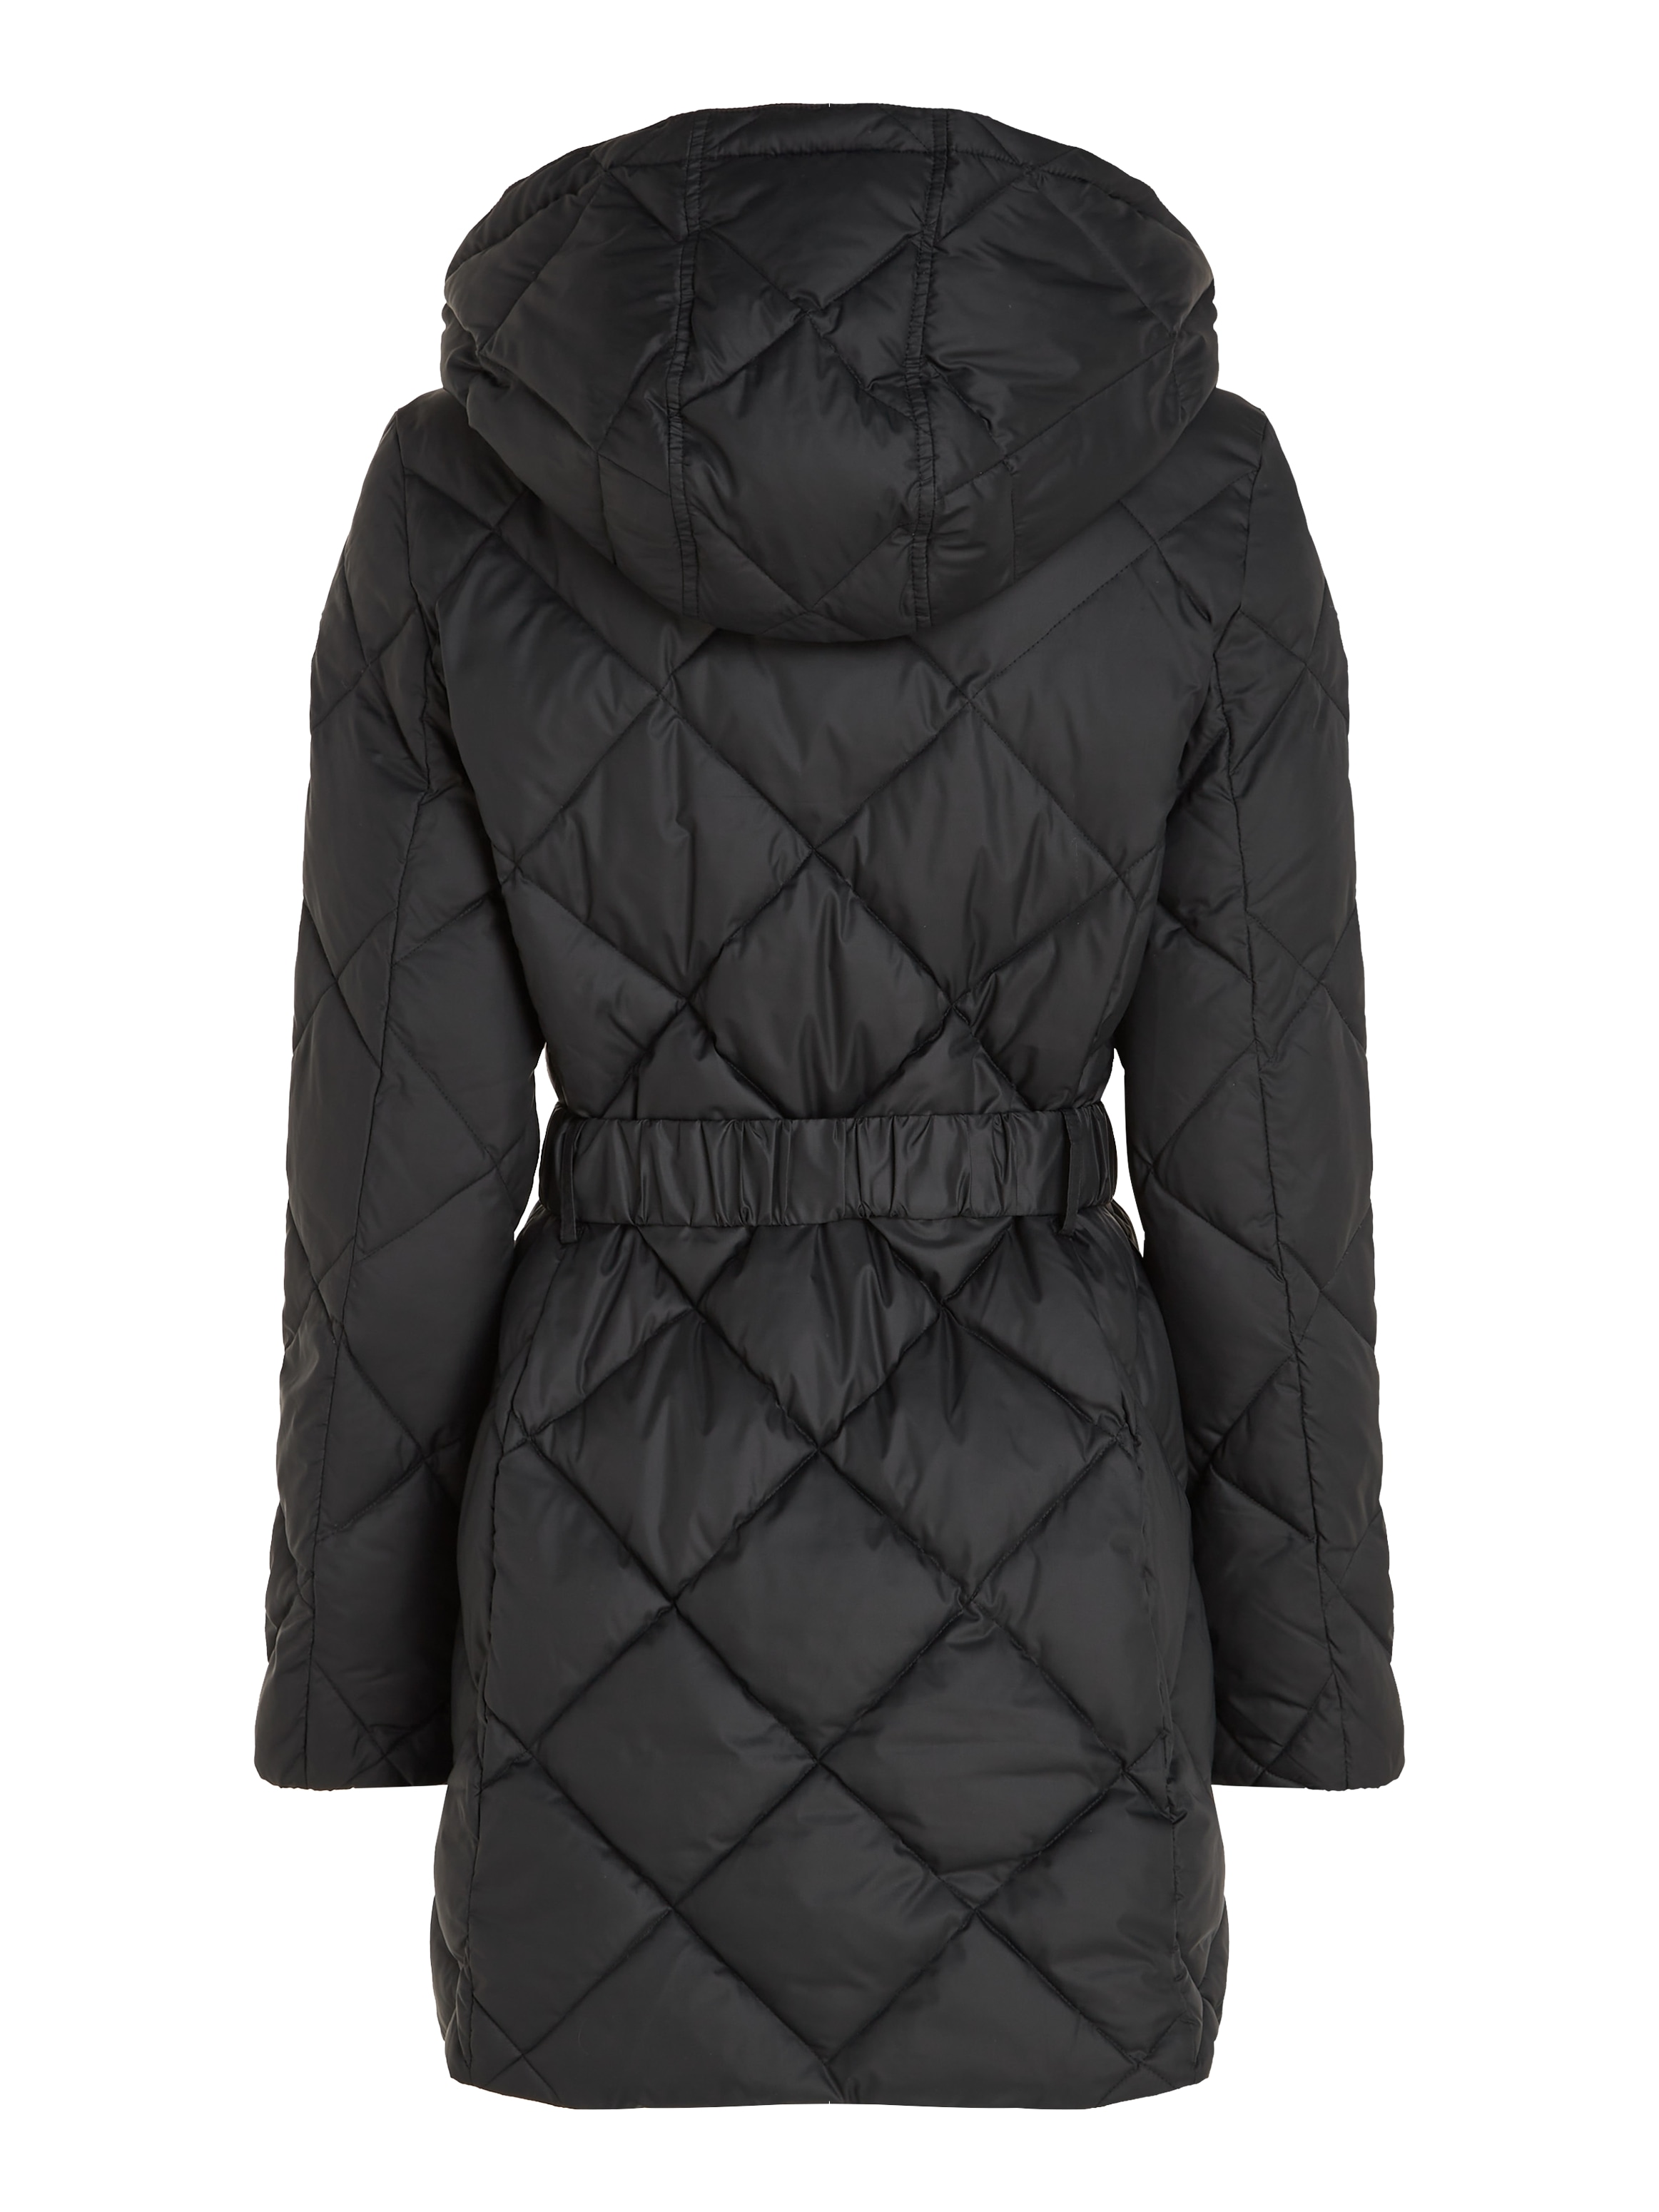 abnehmbarer kaufen Tommy »ELEVATED BELTED COAT«, QUILTED Hilfiger mit Kapuze Steppmantel